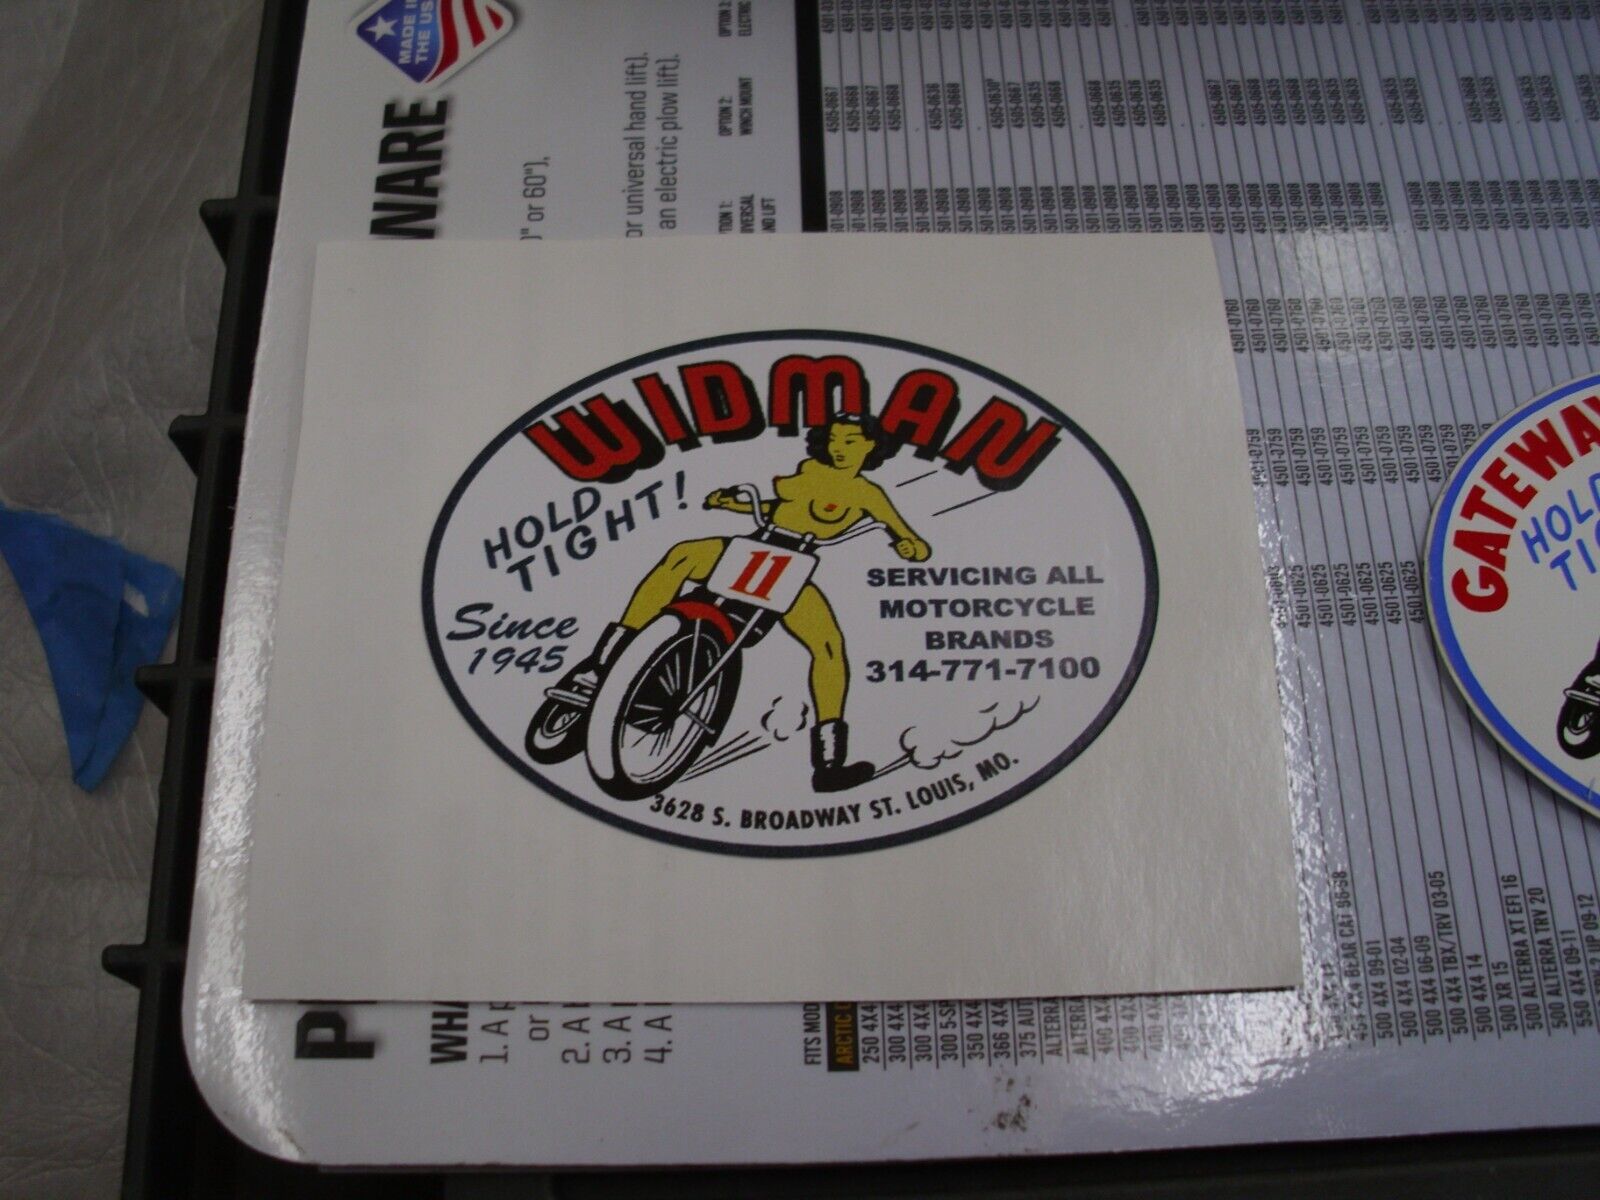 THE RACING LADY, WIDMAN MOTORCYCLE SERVICE, ORIGINAL SIZE 3\